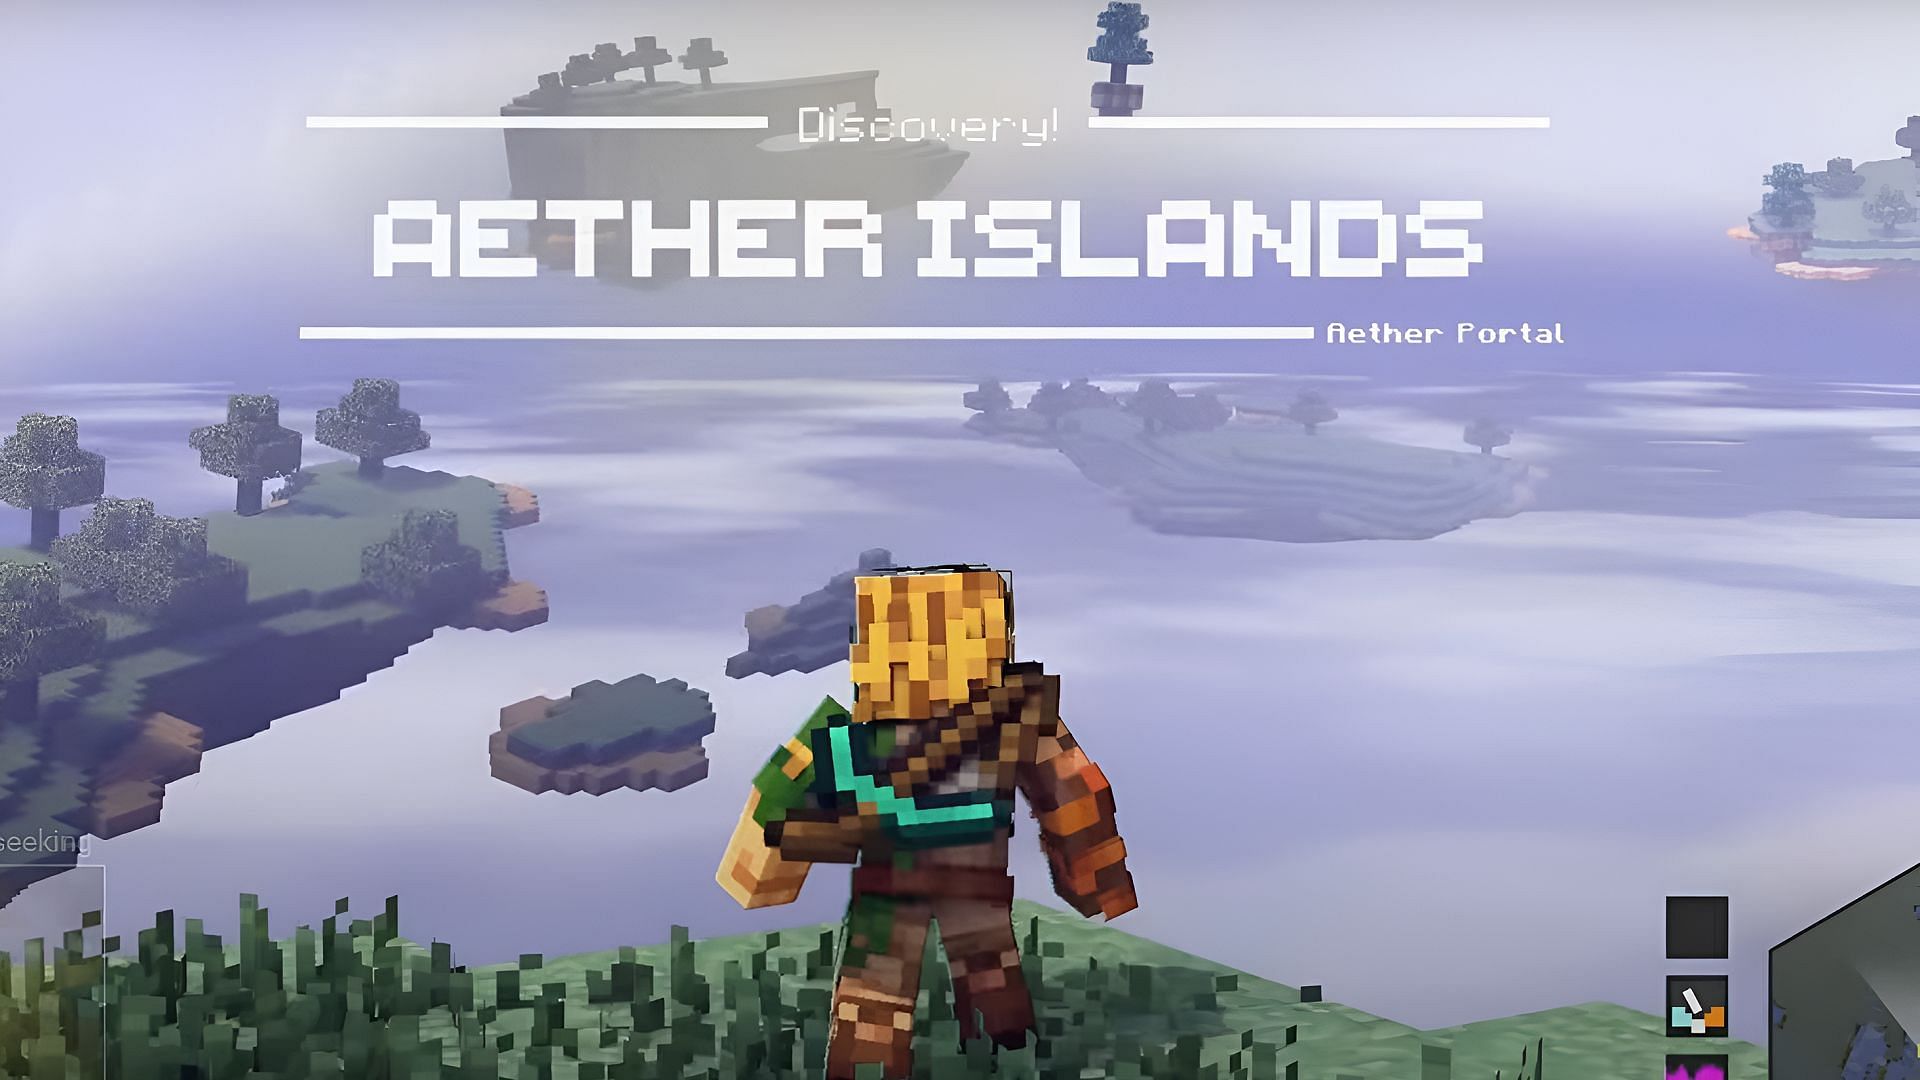 This playable version of Zelda made in Minecraft looks better than